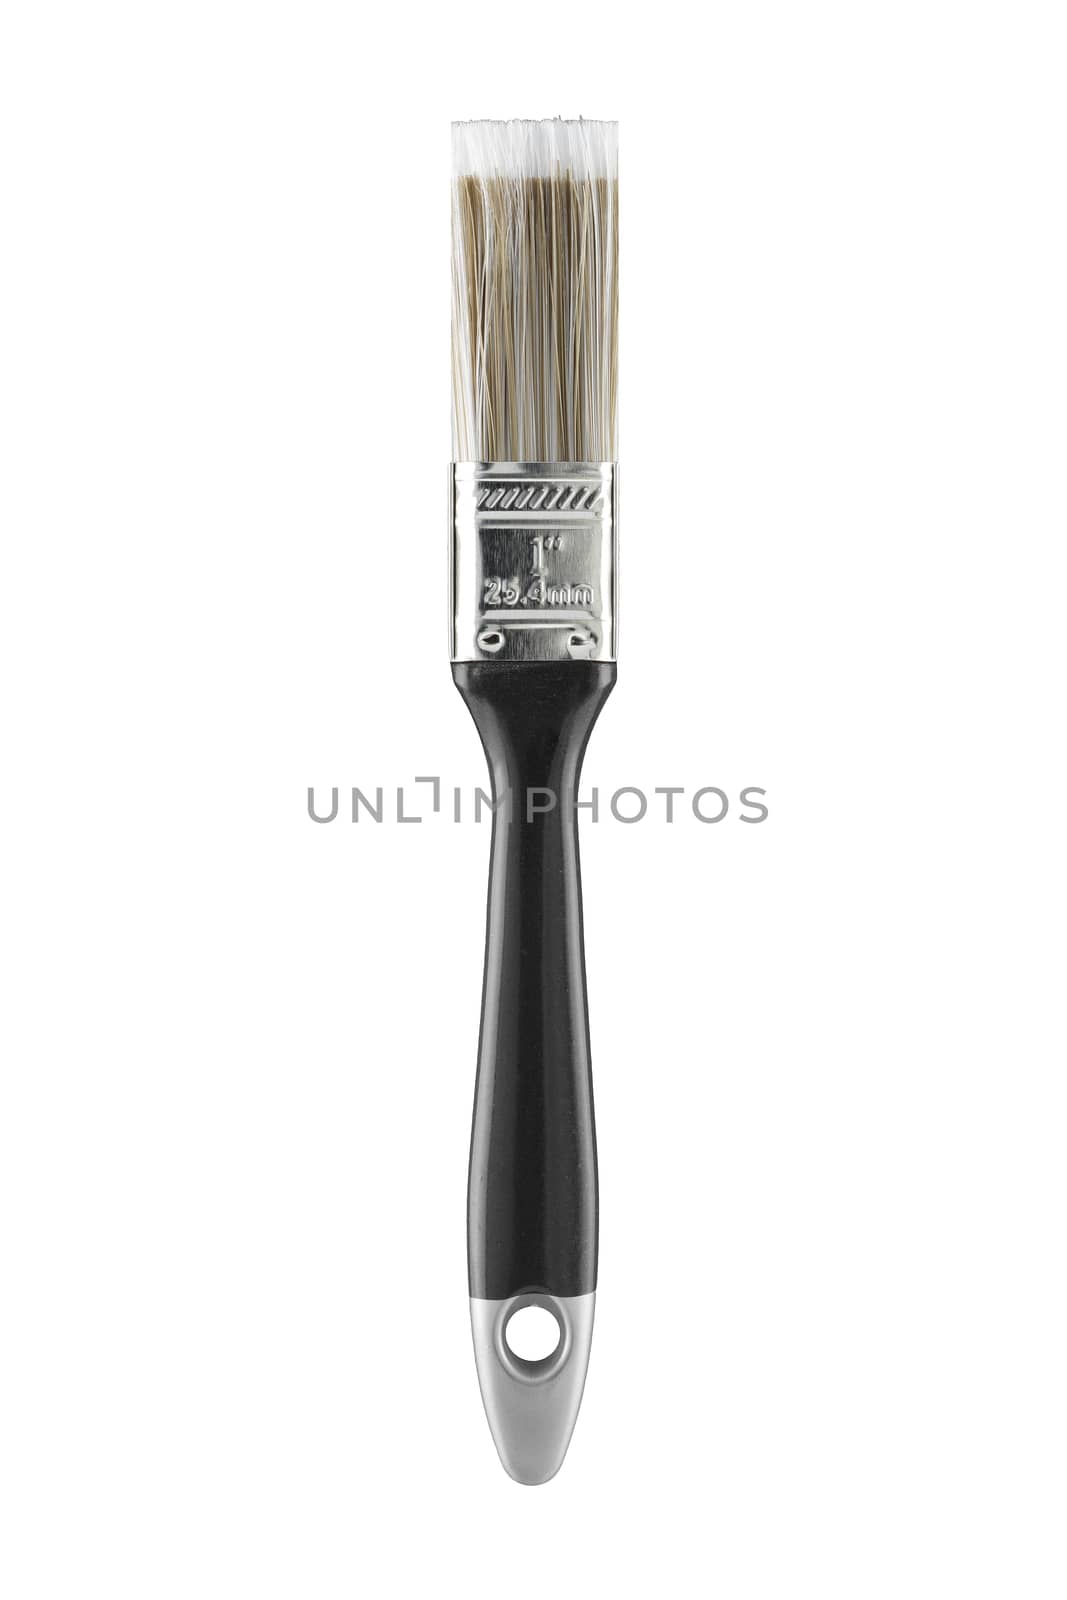 A 1" 25.4mm one inch decorators paint brush on white with clipping path